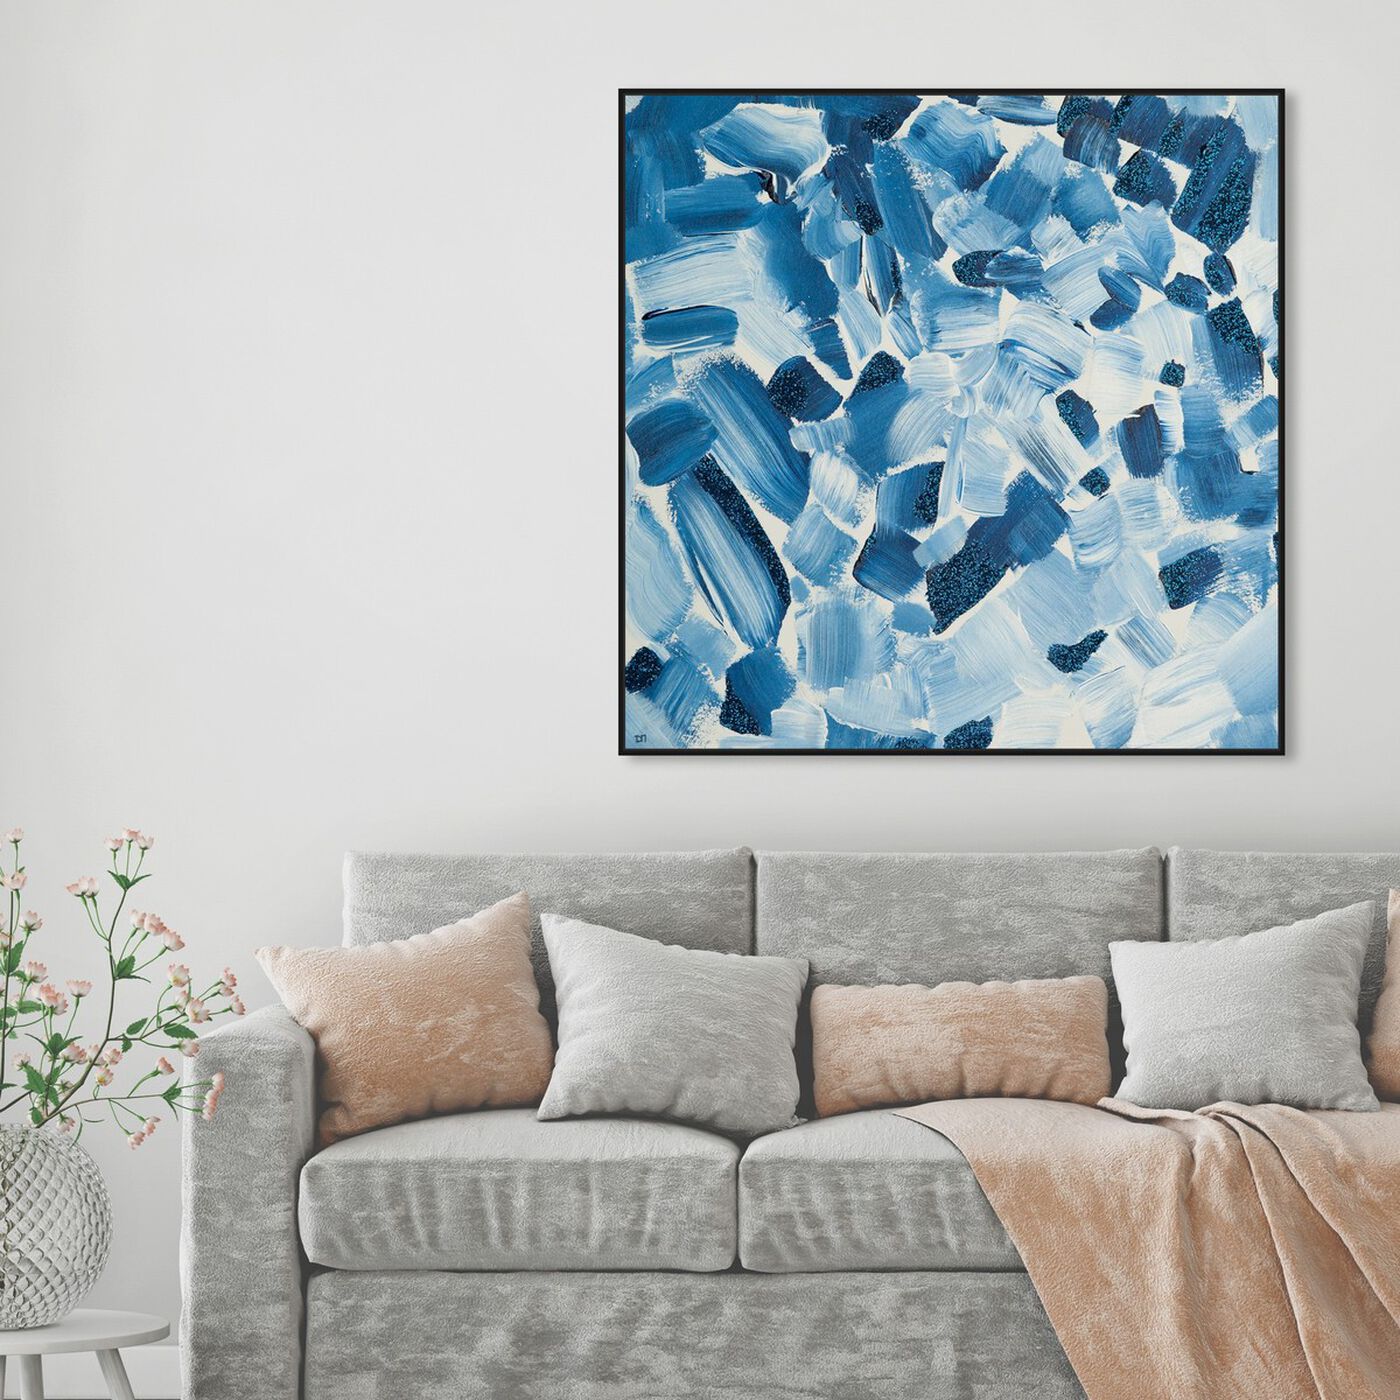 Hanging view of Blue Christmas featuring abstract and paint art.